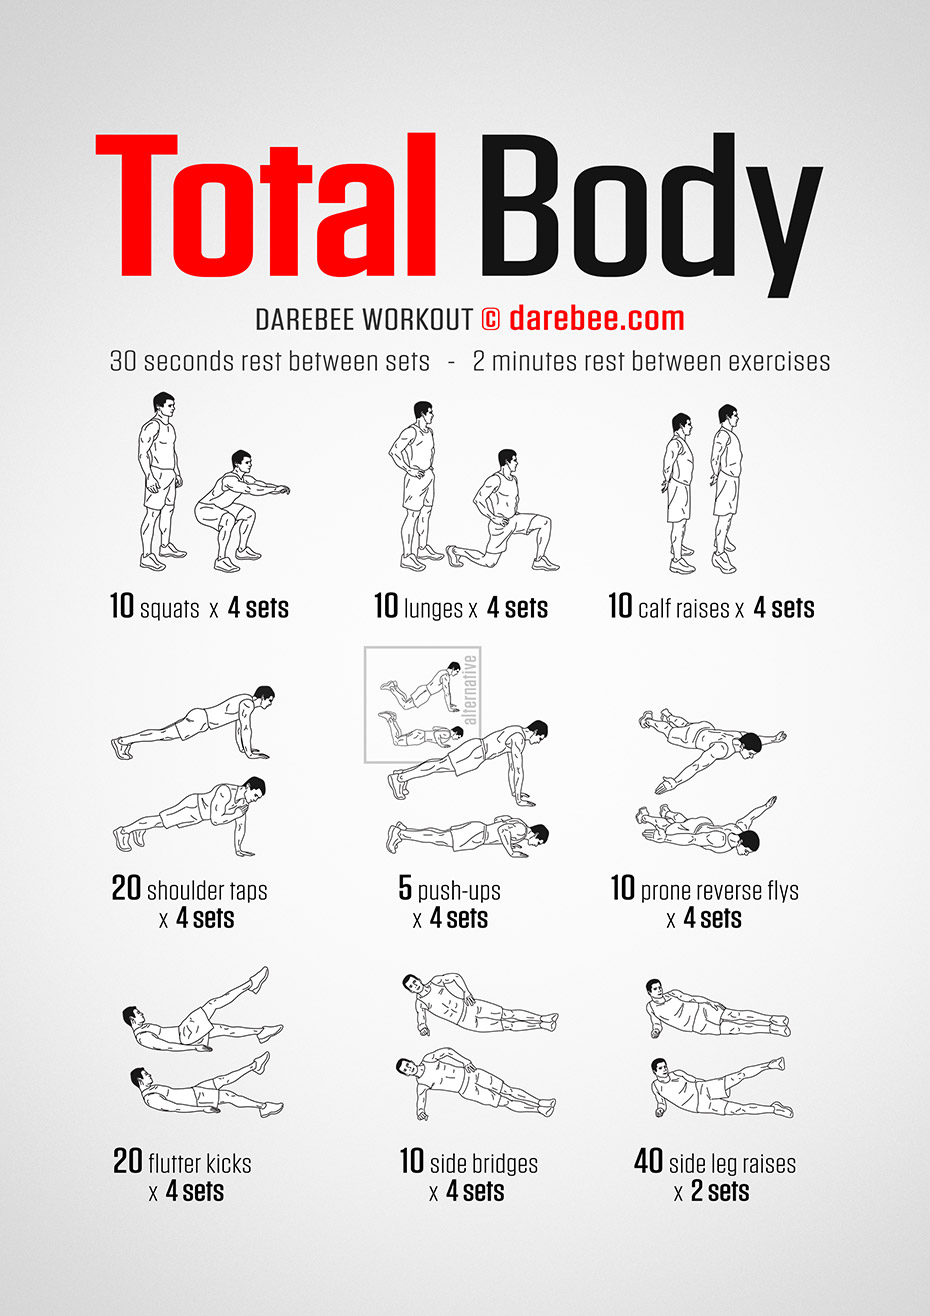 Full Body Circuit Workout At Home With No Equipment Needed…